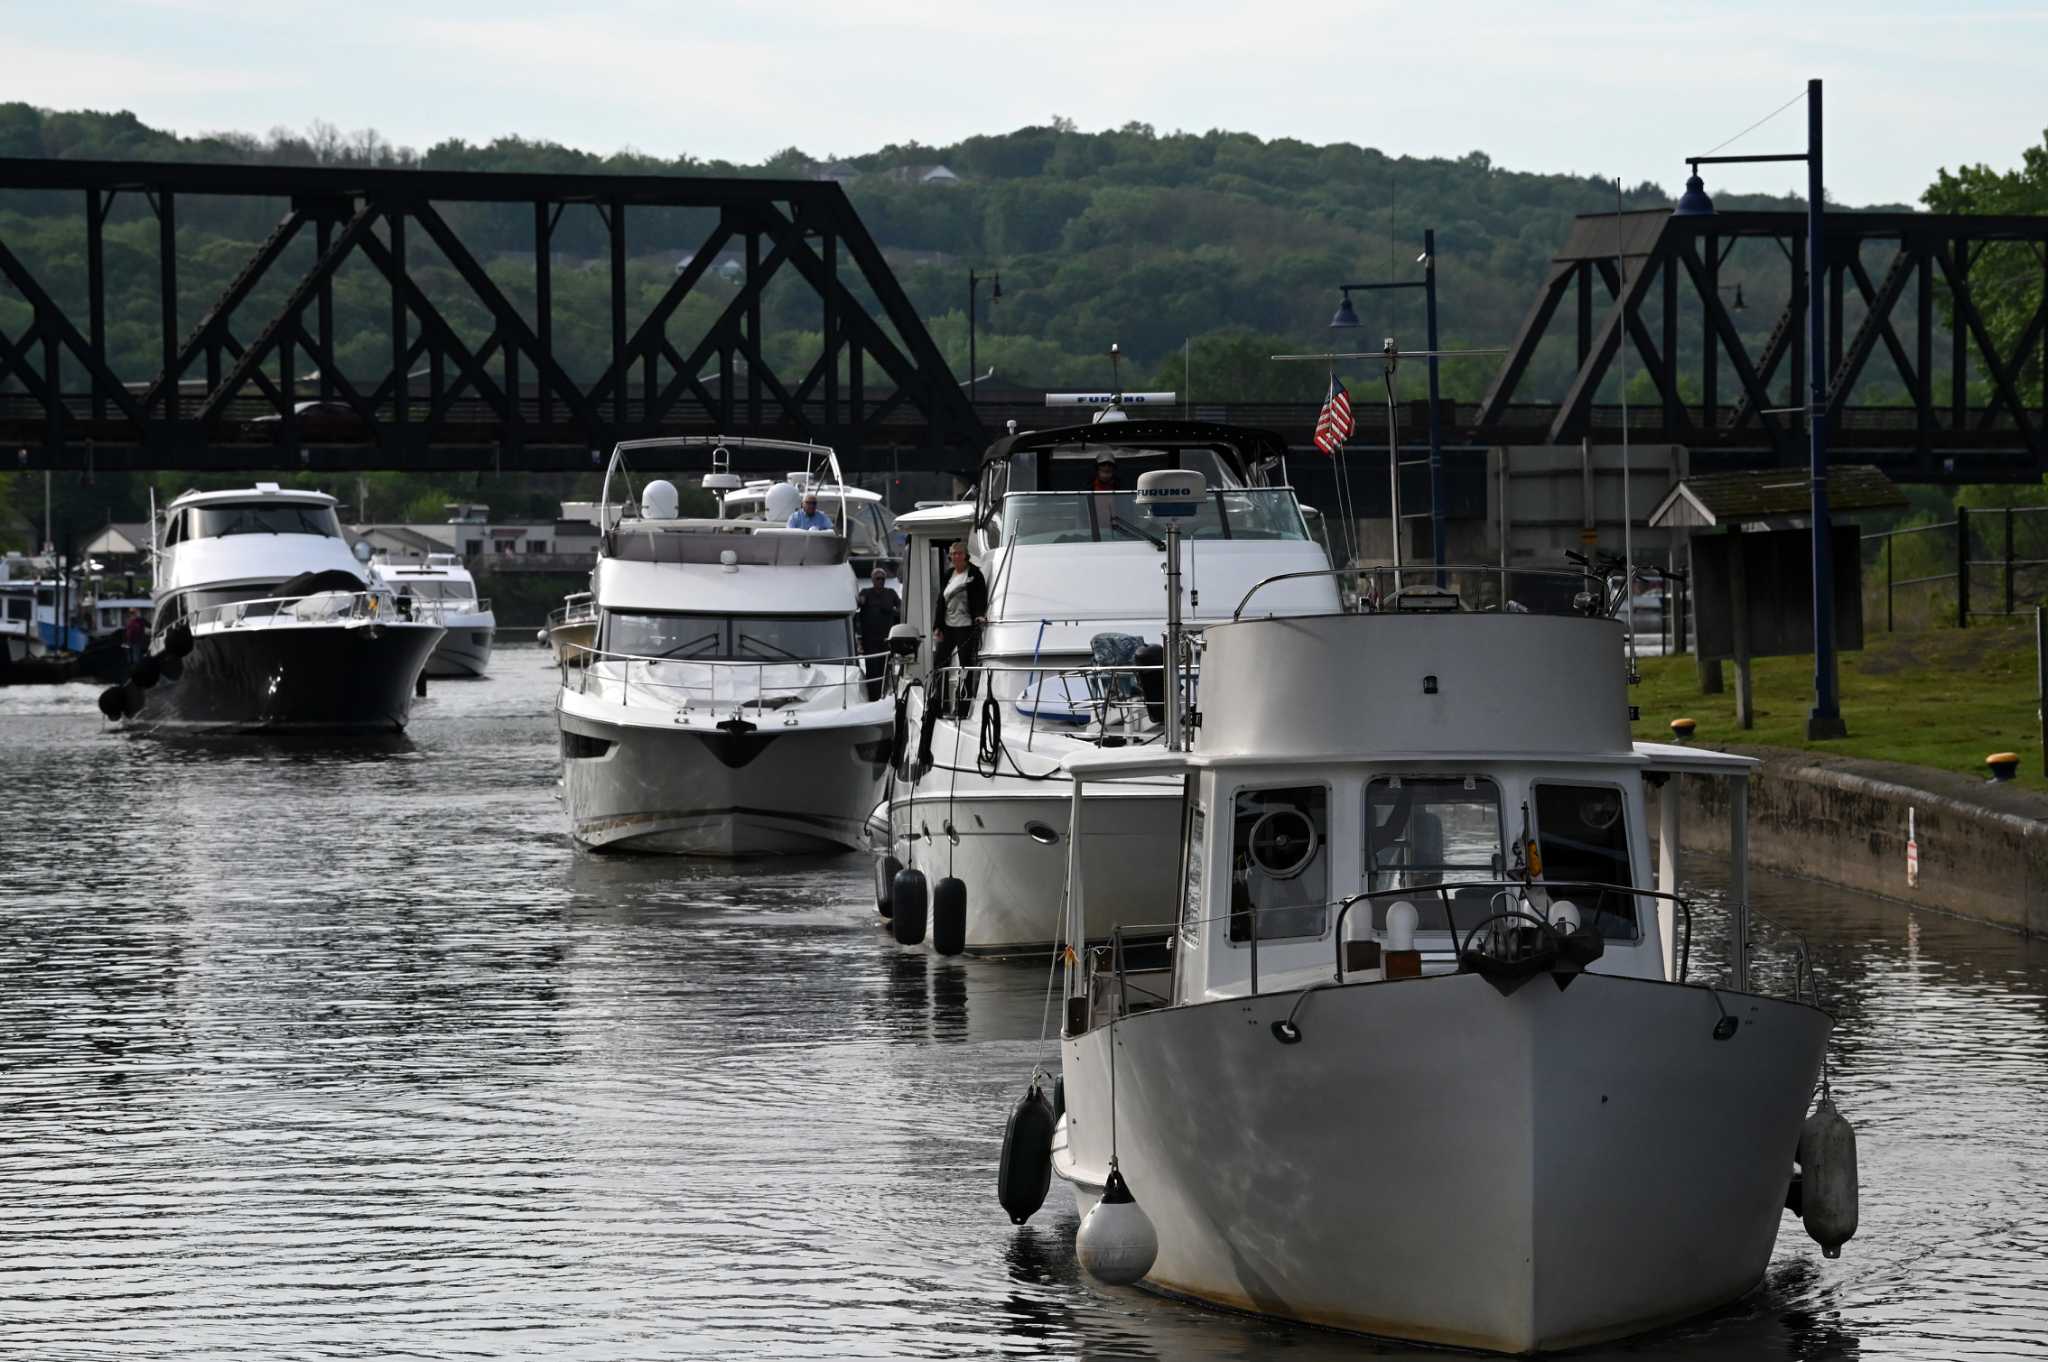 Photos: Yachts, other pleasure boats line up for canal opening